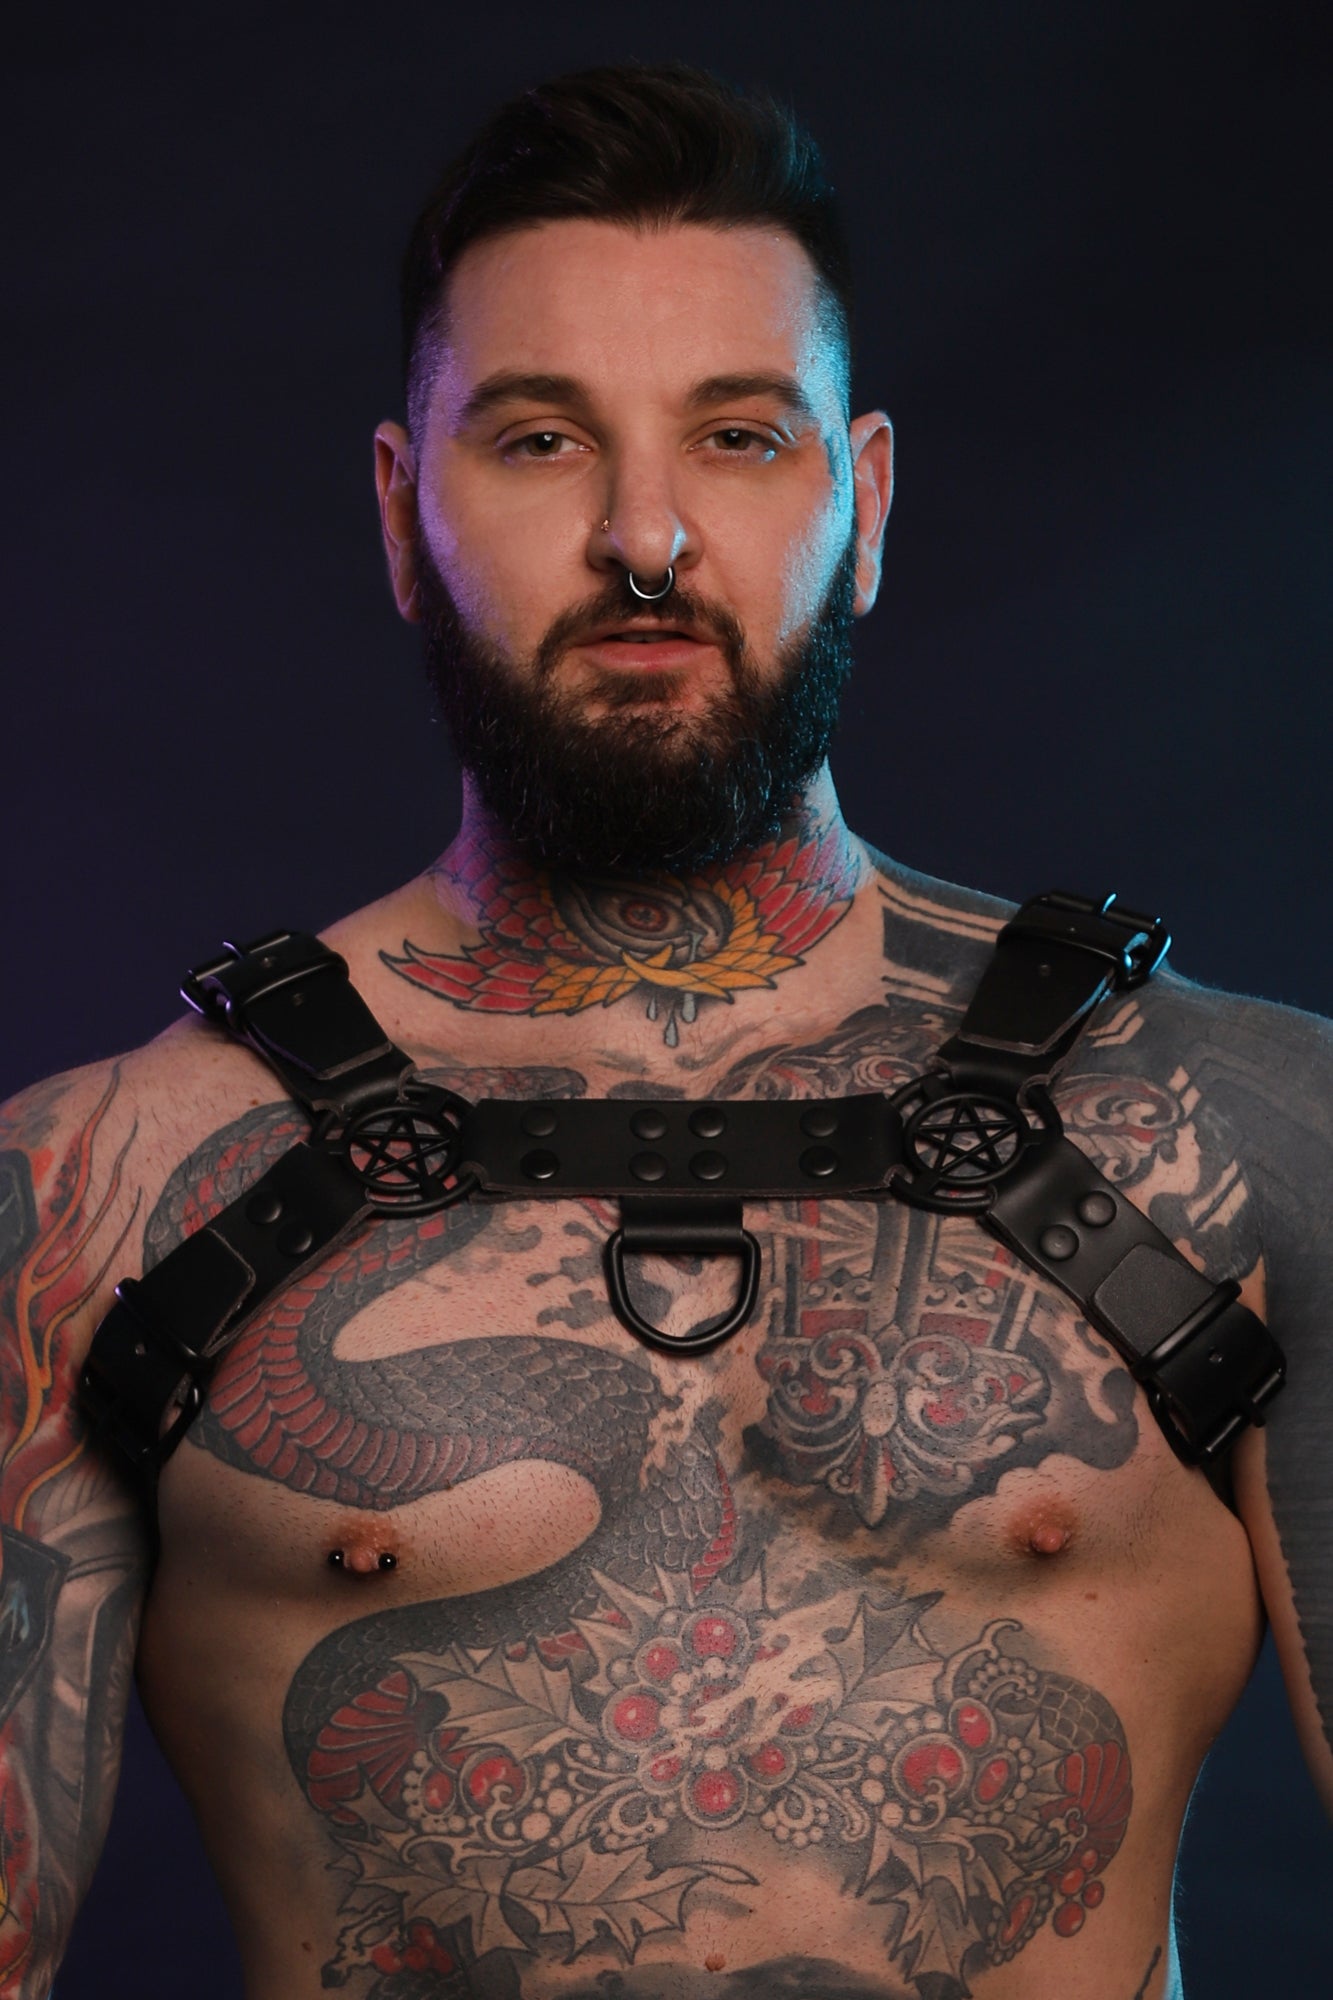 A front facing product photo of a black Beef Harness by Twisted Beast.